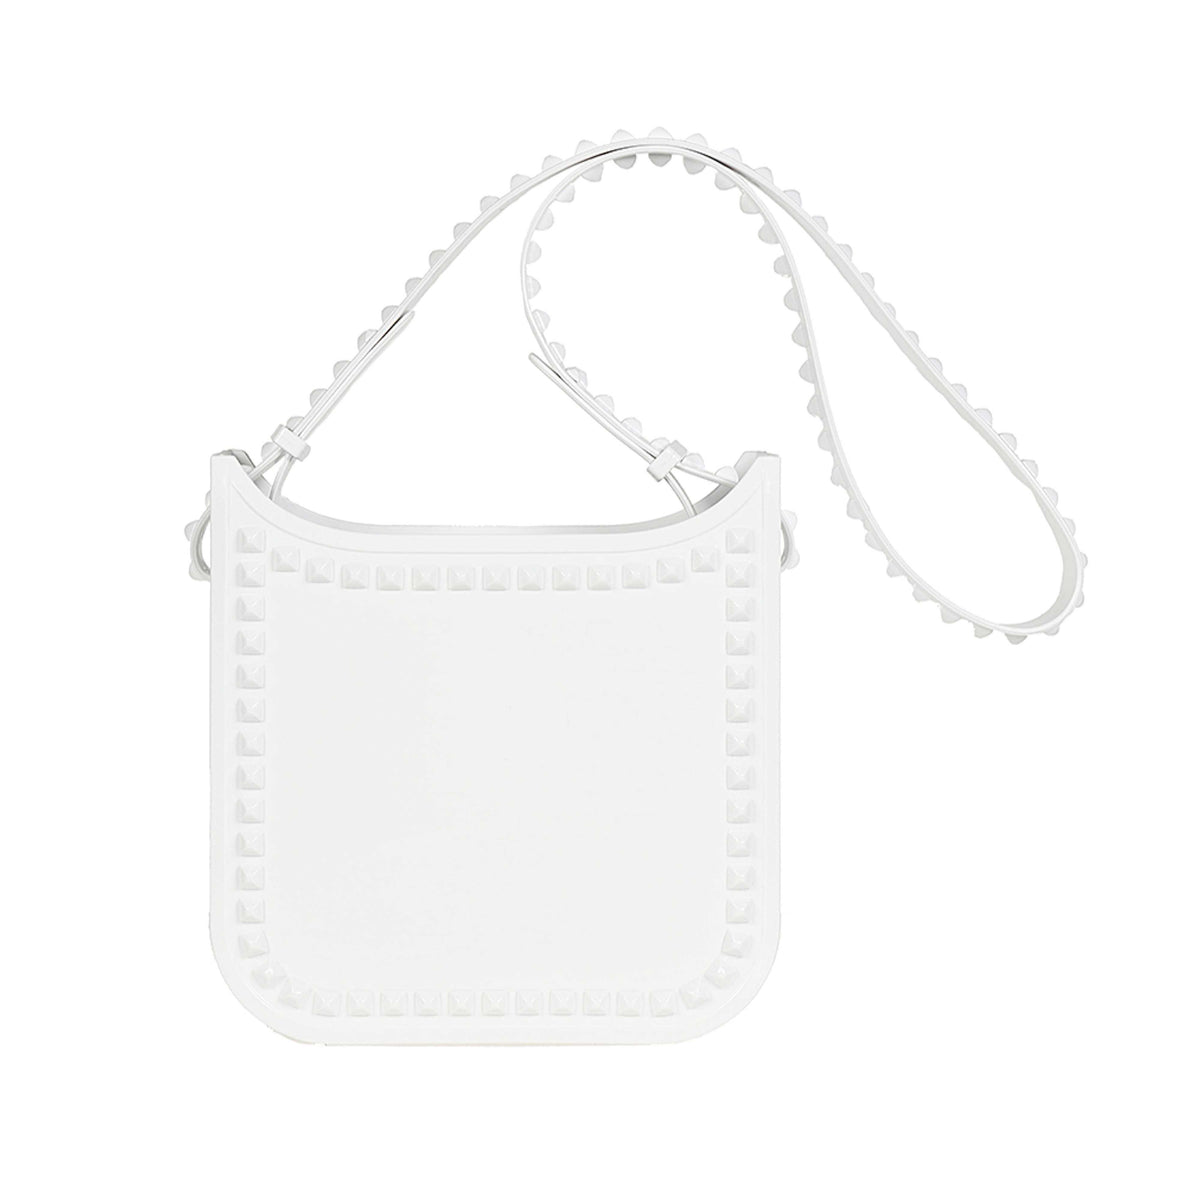 White Carmen Sol jelly bags from Carmen Sol Toni perfect for both beach and the city